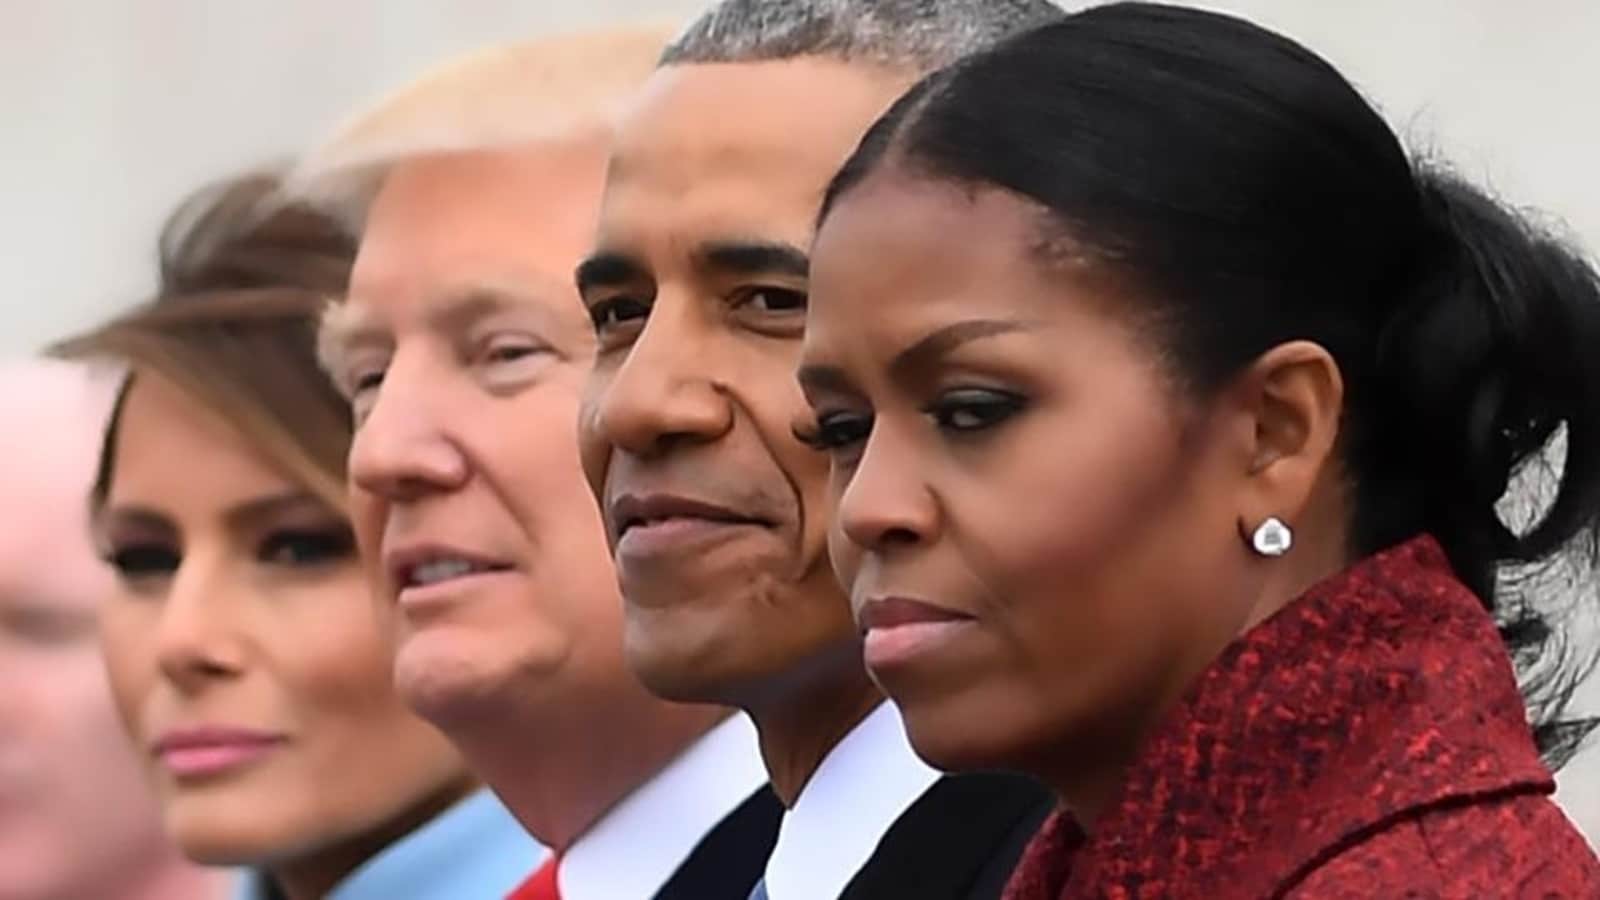 Donald Trump takes brutal dig at Michelle Obama amid calls to replace Biden: ‘I would be very happy if…’